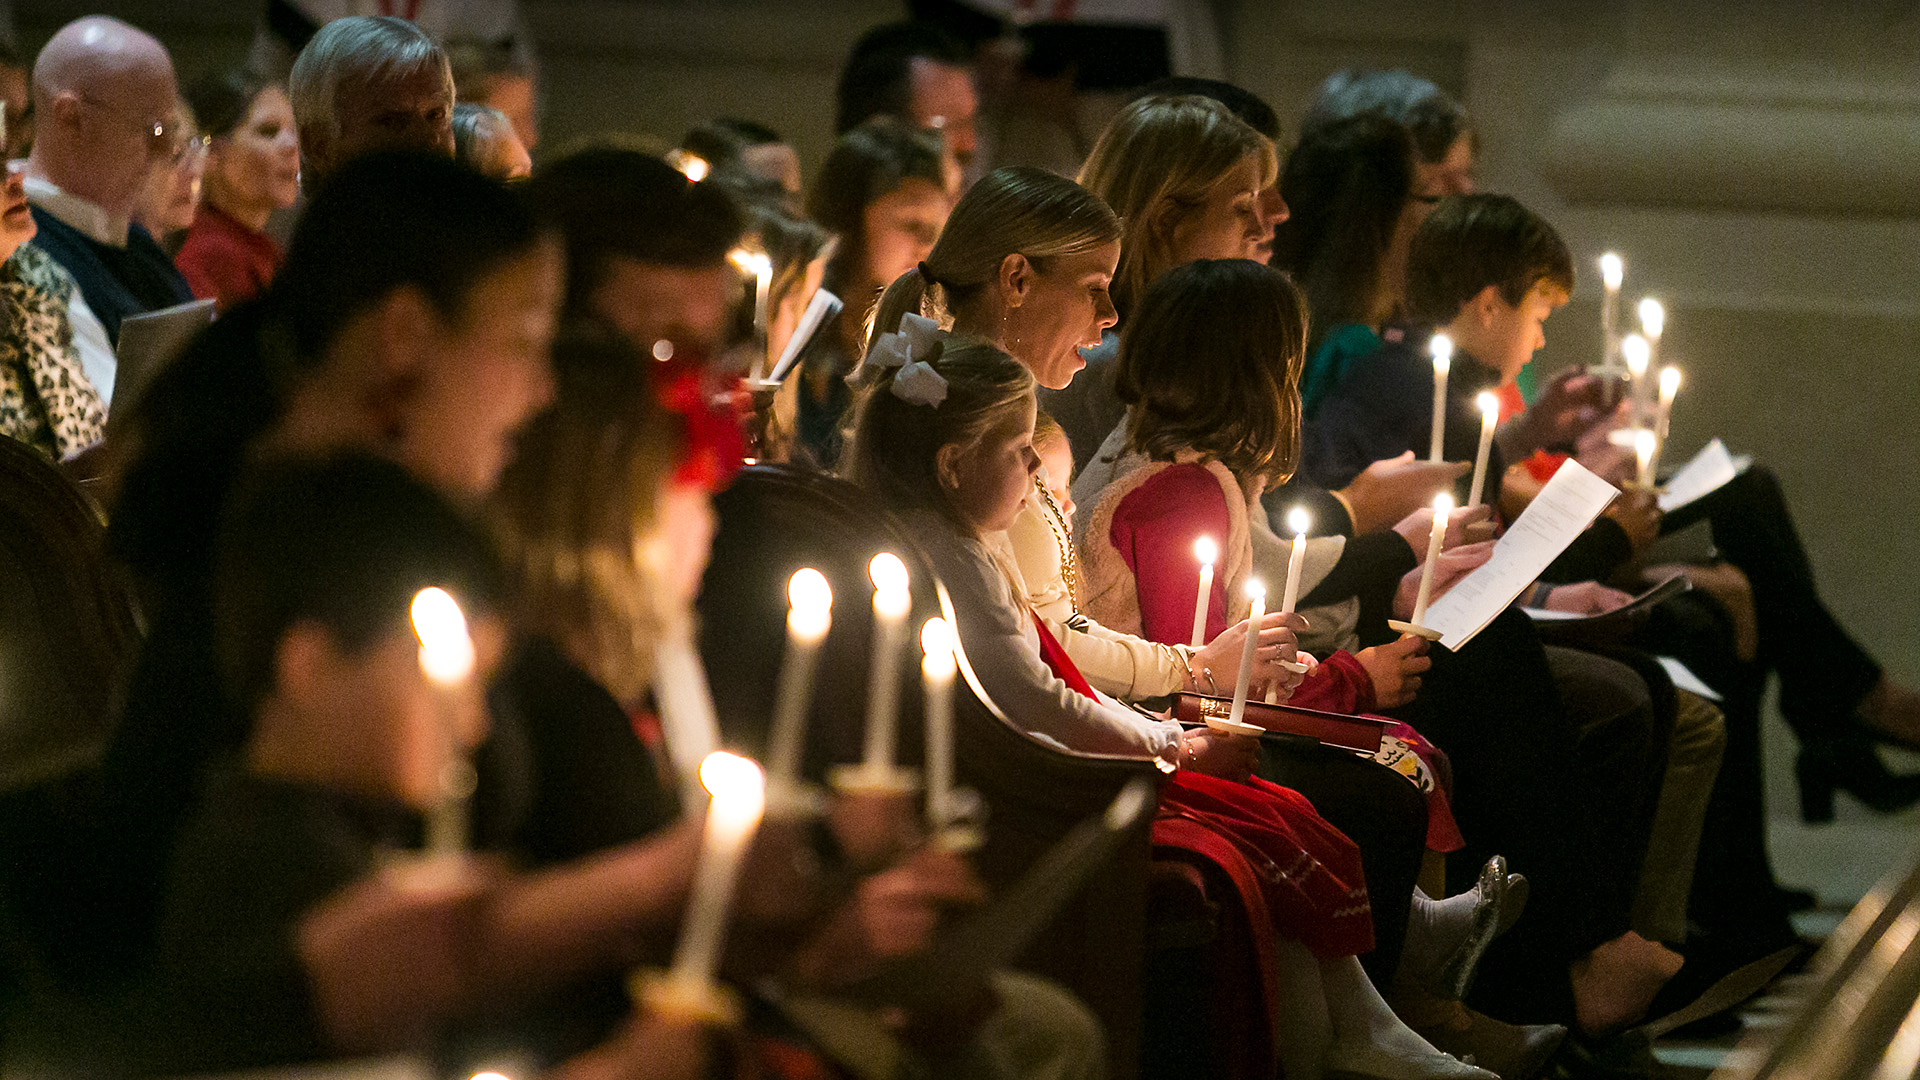 Our community comes together for a candlelight service at Christmas as an annual tradition of at Peachtree Road United Methodist Church in Atlanta, Georgia as part of our Music Concert Series.